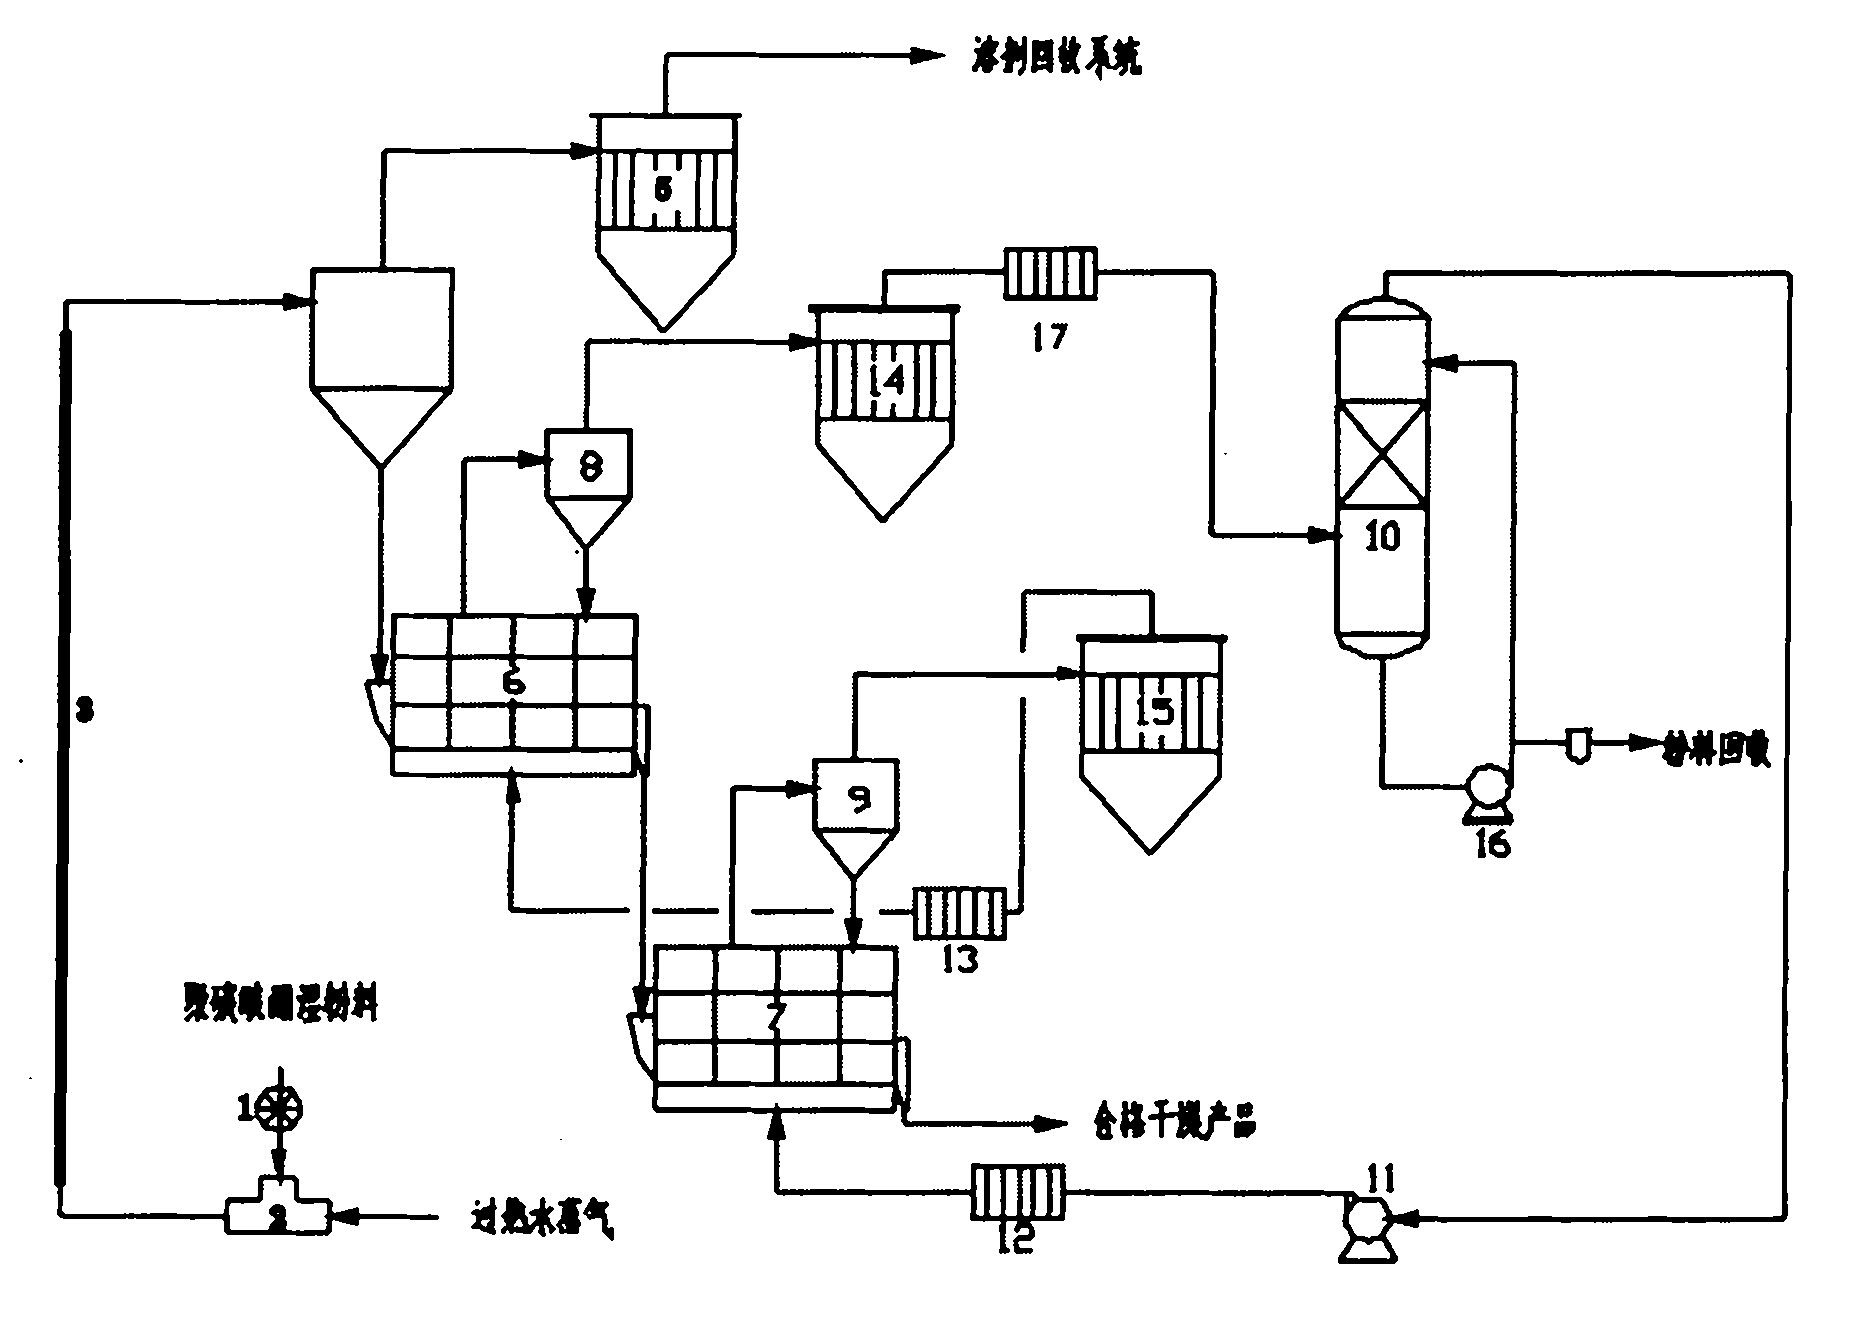 Method for drying poly carbonate (PC)